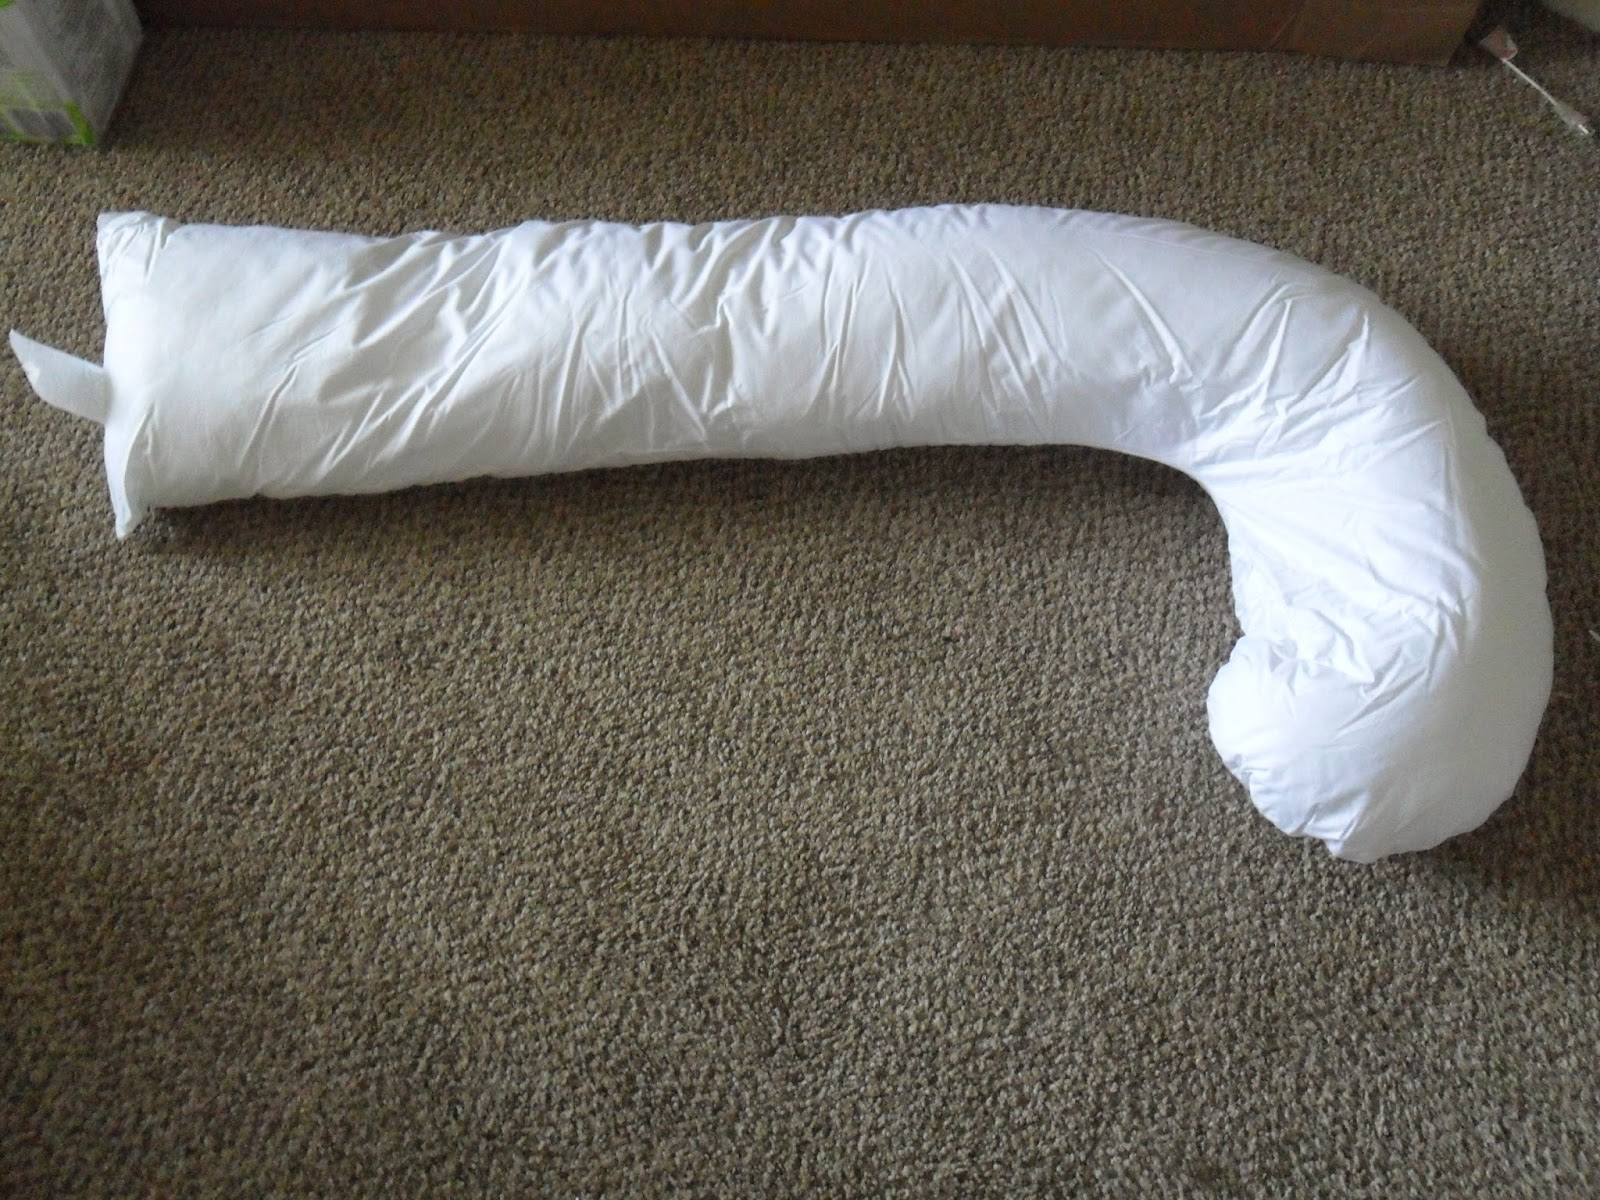 Pregnancy Problems: Third trimester and sleeping comfy. Snoozer Full Body Pillow. Achoo Allergy.com Review.